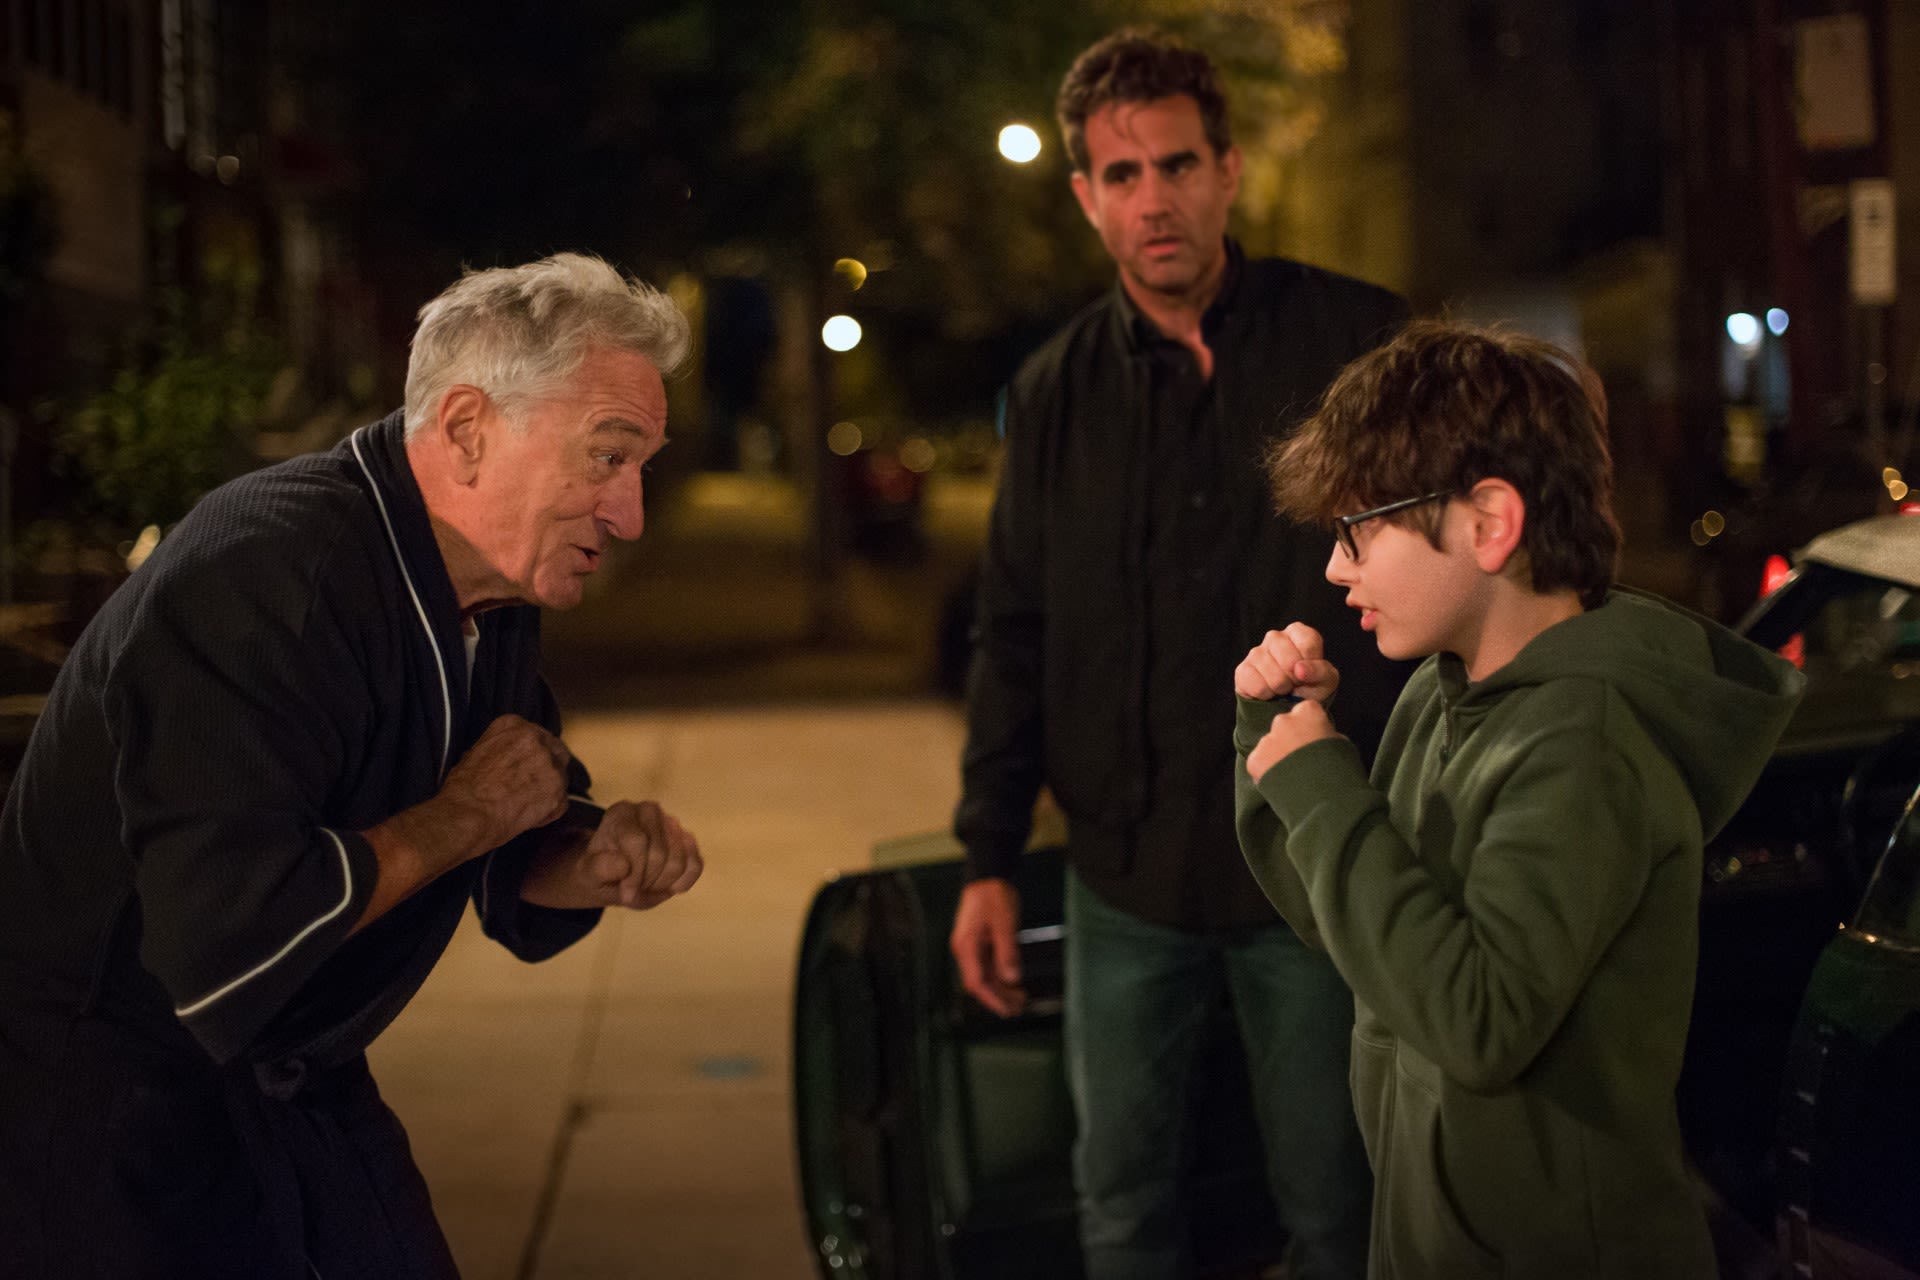 'Ezra' review: Bobby Cannavale, Robert De Niro, Rose Byrne and William A. Fitzgerald film leads with sincerity for autism representation